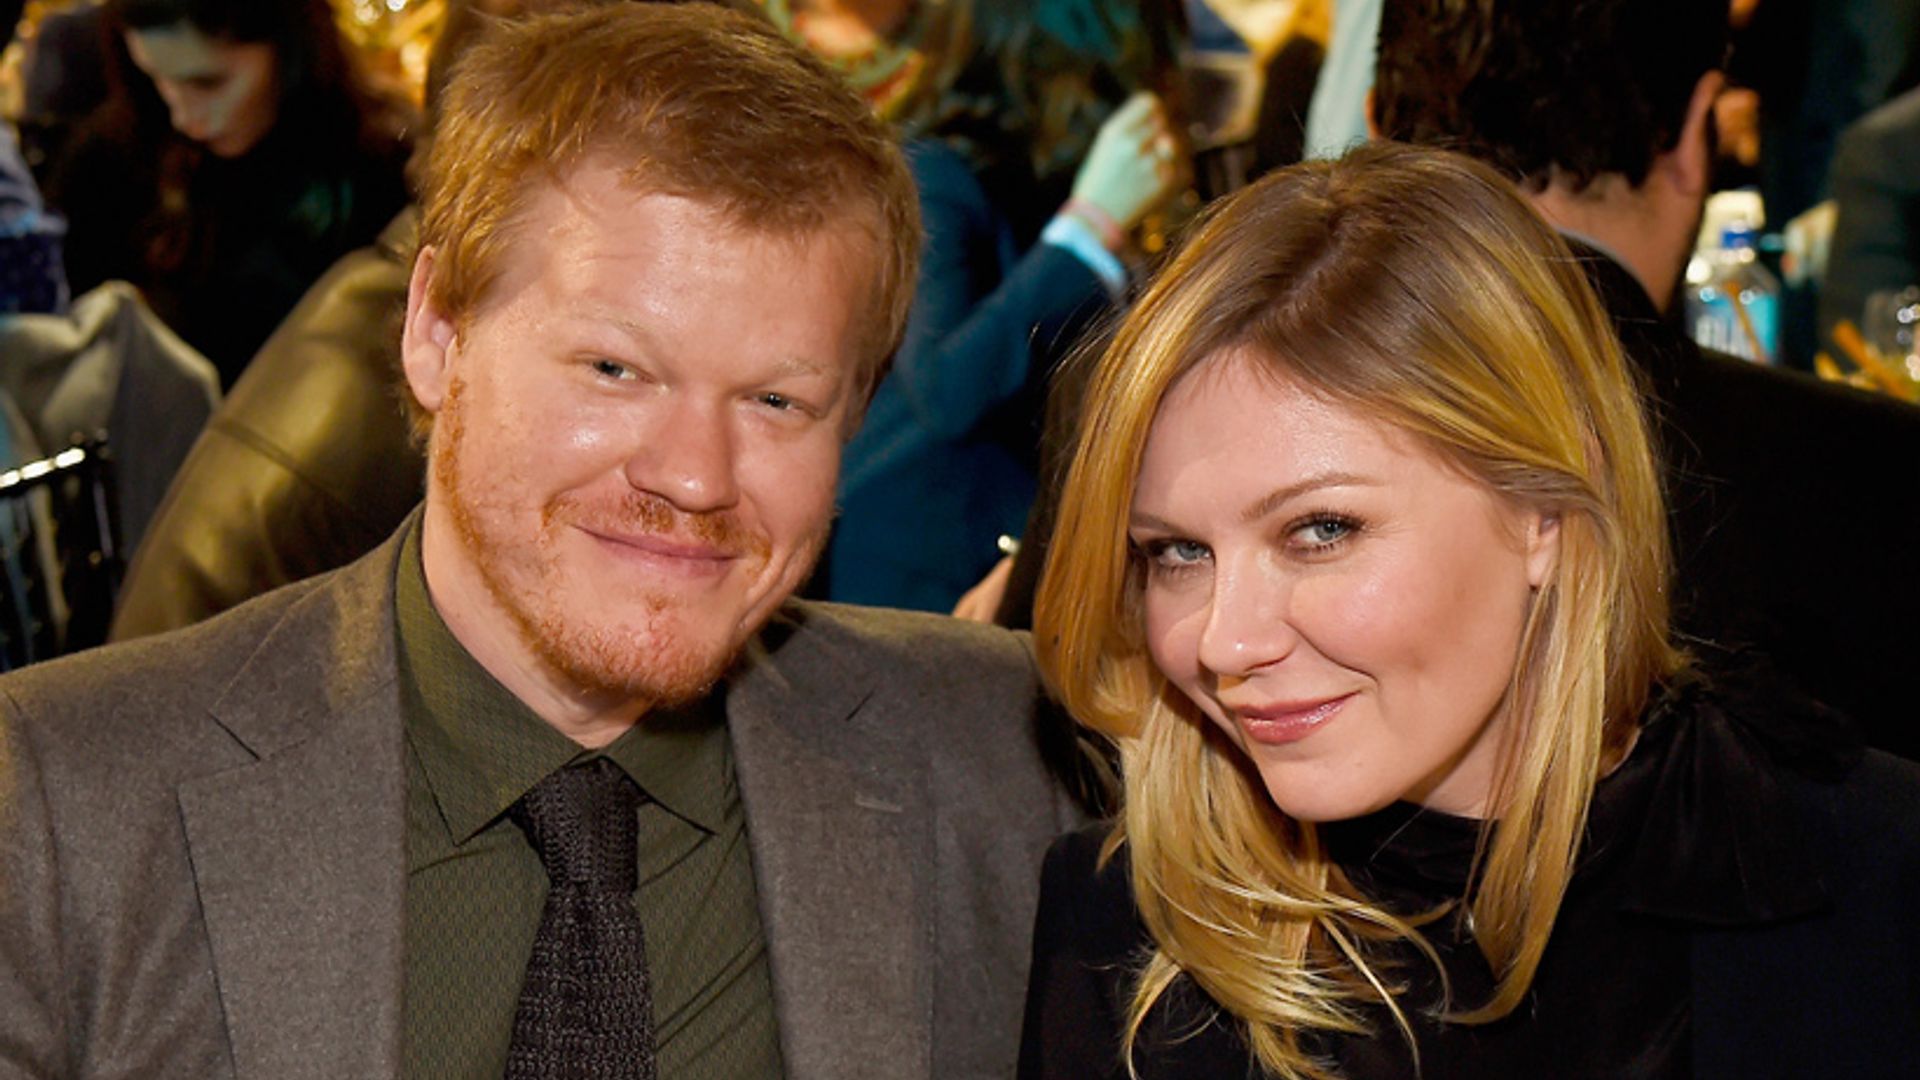 Kirsten Dunst has given her baby boy the most adorable name